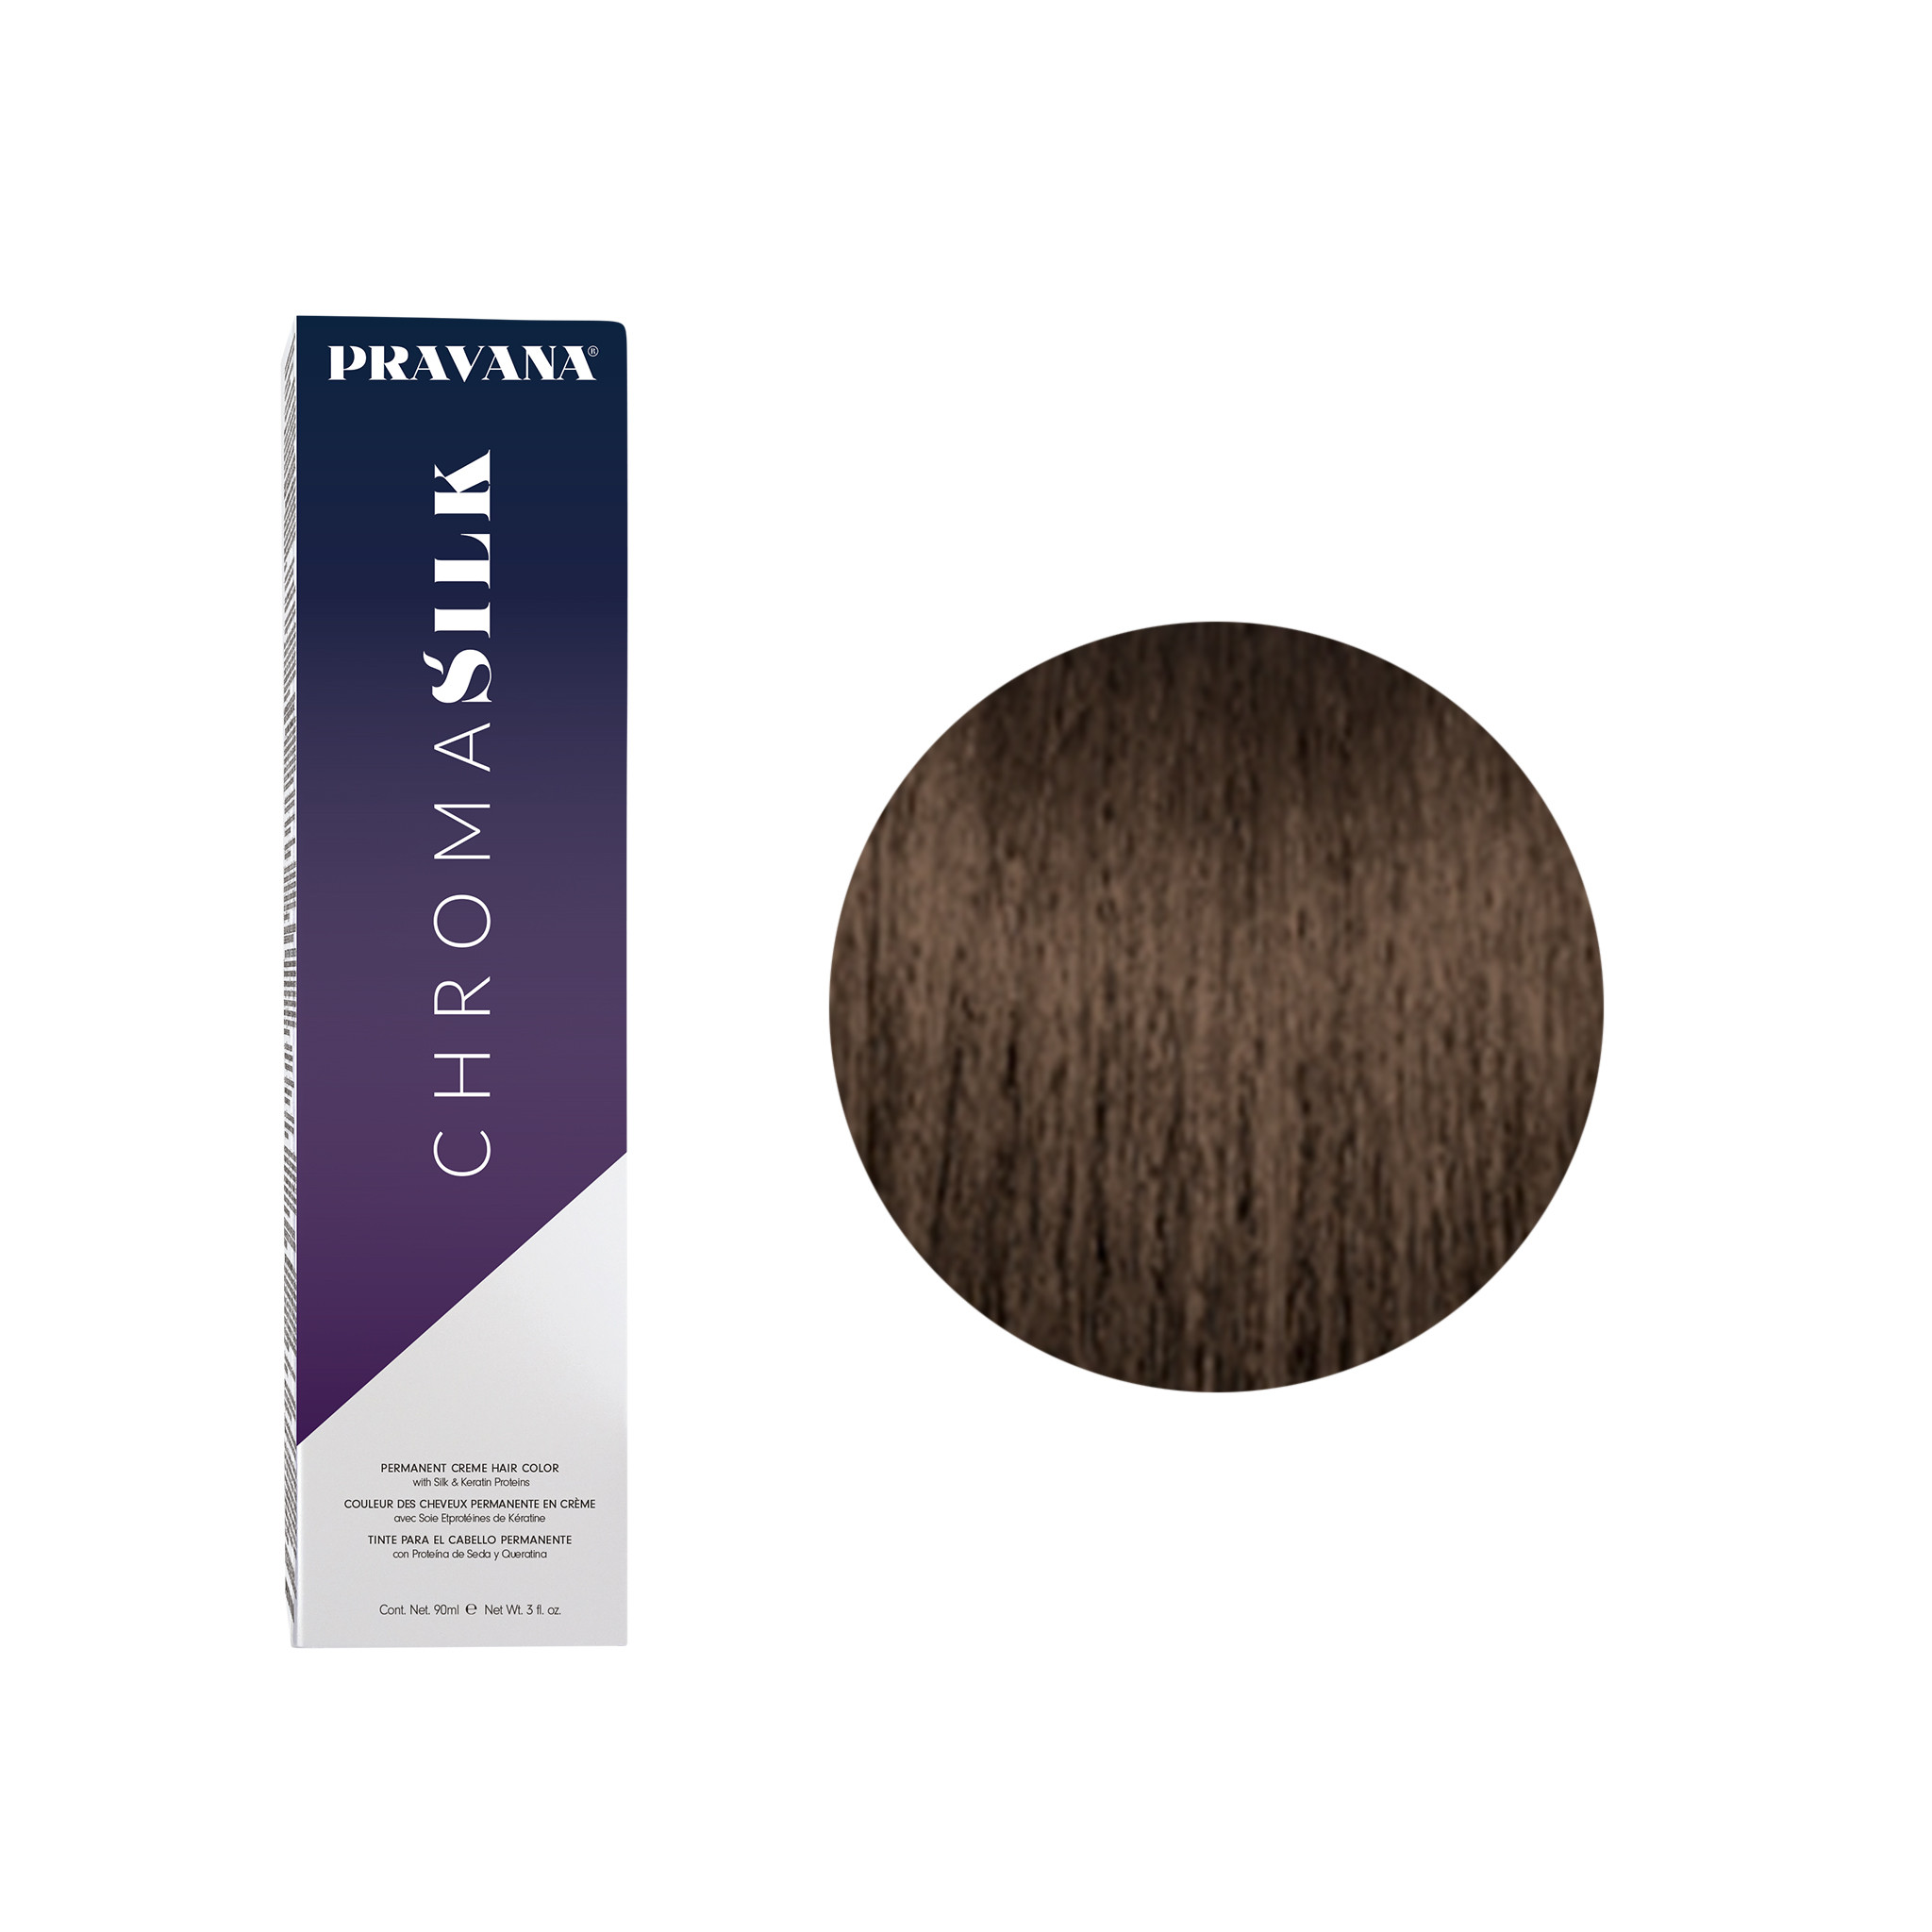 NEW Pravana ChromaSilk Blended Neutrals
A Perfect Blend, Made Easy
7 permanent pre-blended neutral tones that provide multi-dimensional results

These seven permanent colours come pre-blended and are intermixable with any ChromaSilk permanent shade for ultimate customisation